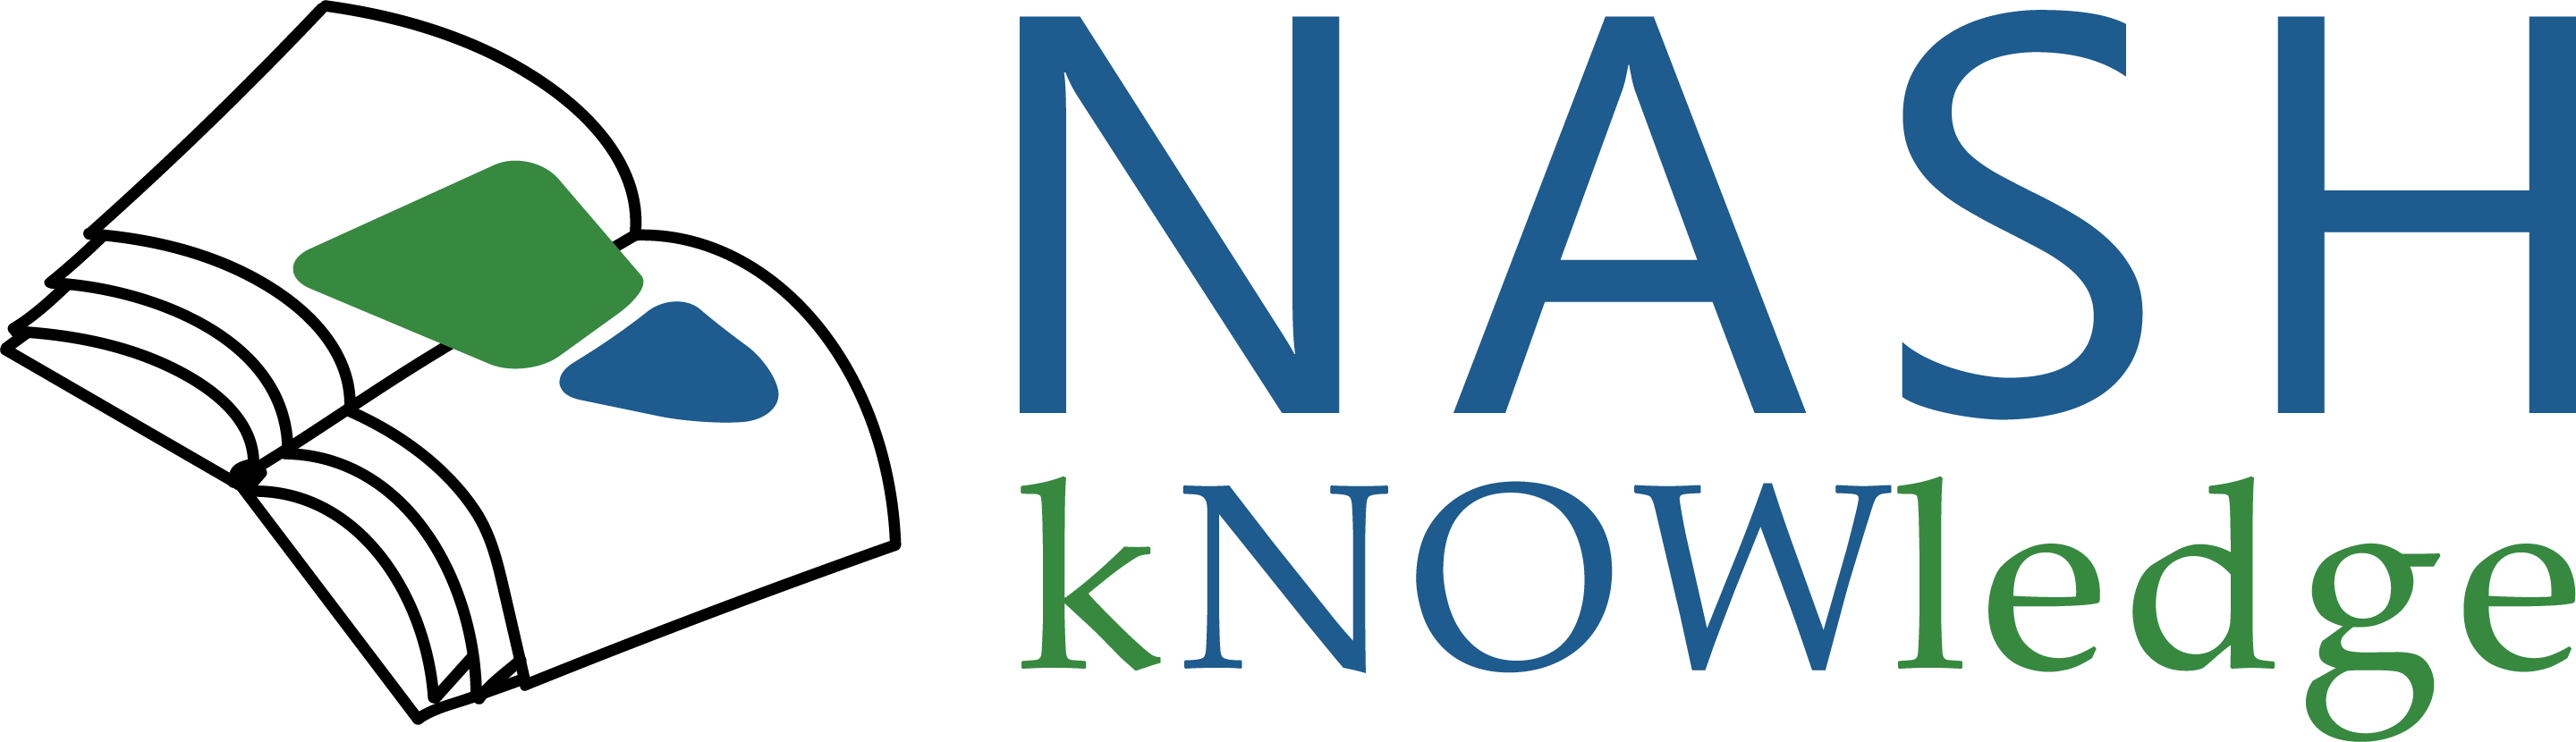 NASH kNOWledge is a 501(c)3 nonprofit organization intended to raise awareness of NAFLD and NASH.